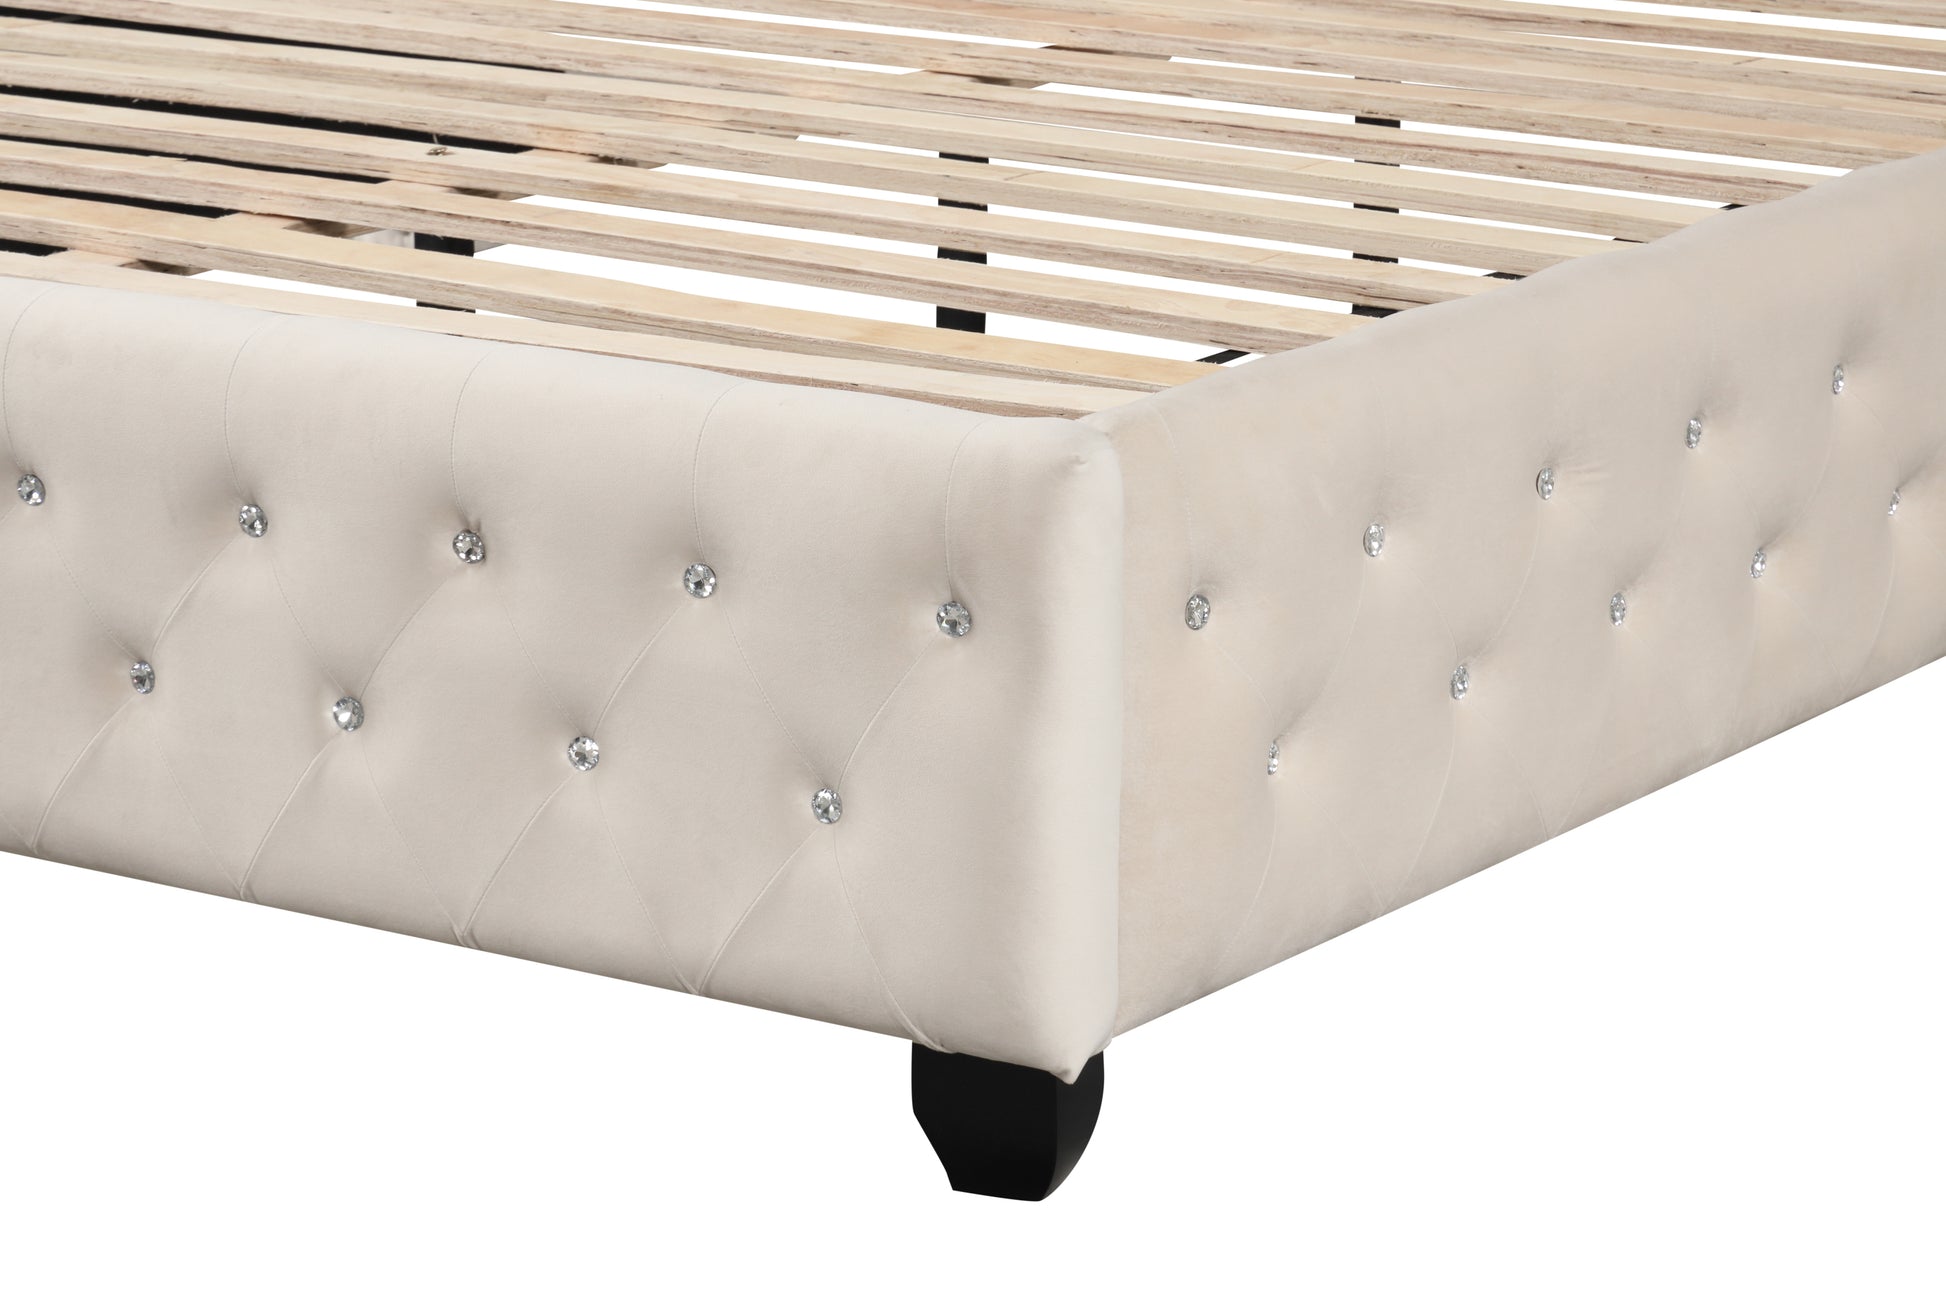 Sophia Crystal Tufted Full 4 Pc Bed Made with Wood in Cream - Enova Luxe Home Store